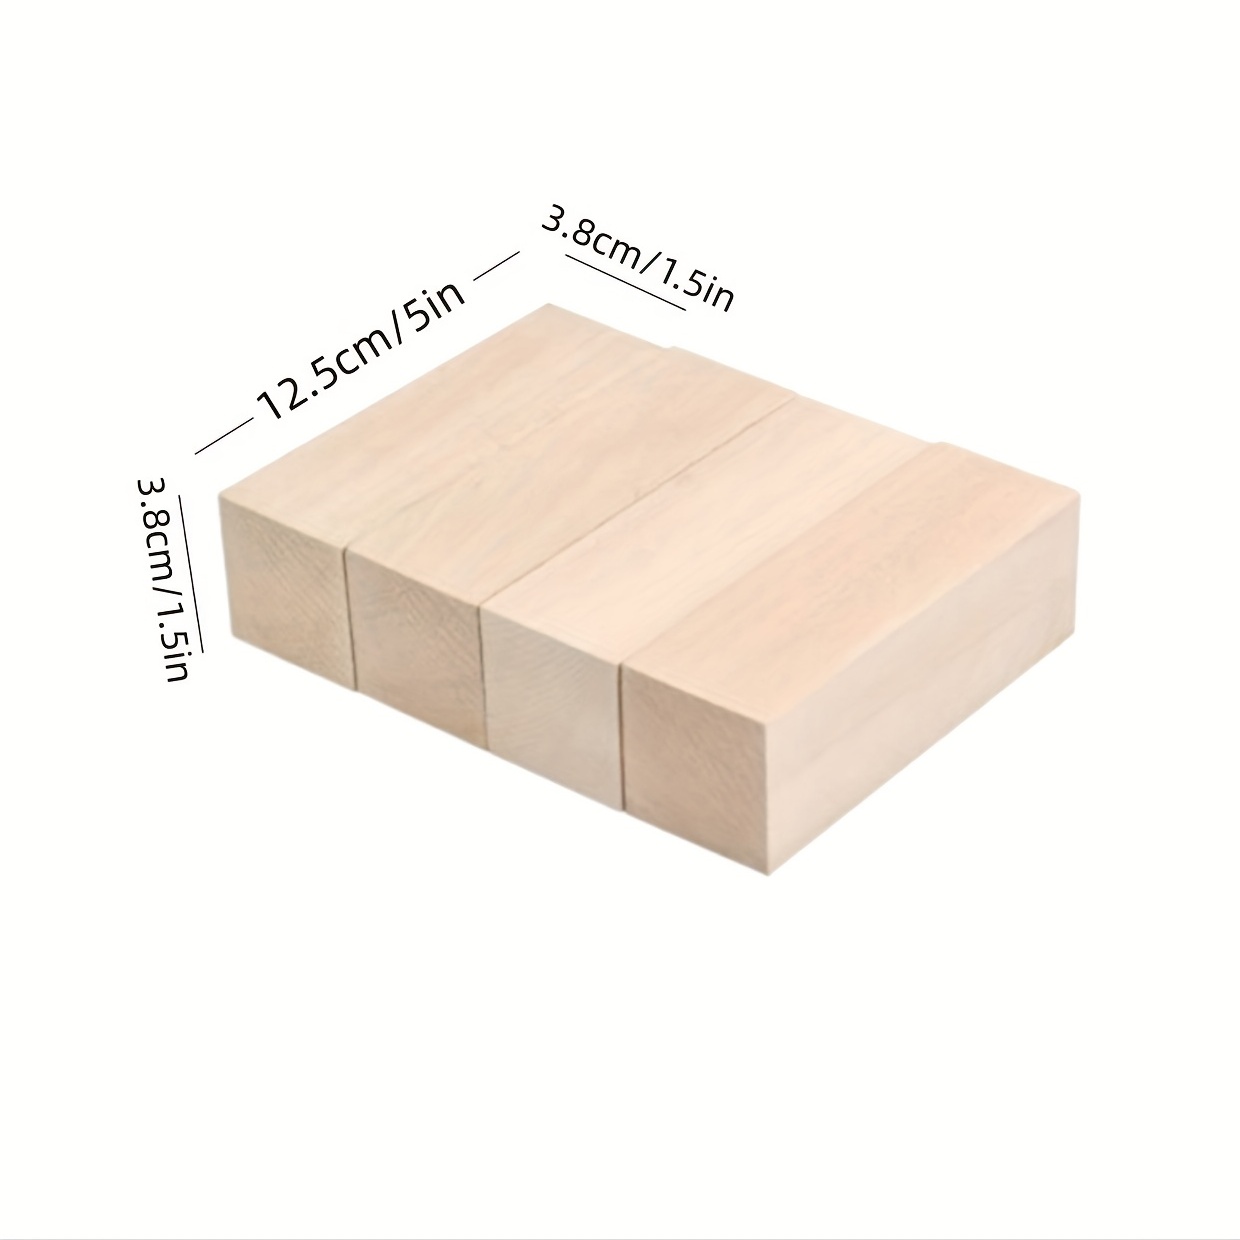 8 Pack Unfinished Basswood Carving Blocks Kit, 4 x 2 x 2 Inch Unfinished  Bass Wood Whittling Soft Wood Carving Block Set for Kids Adults Wood  Carving